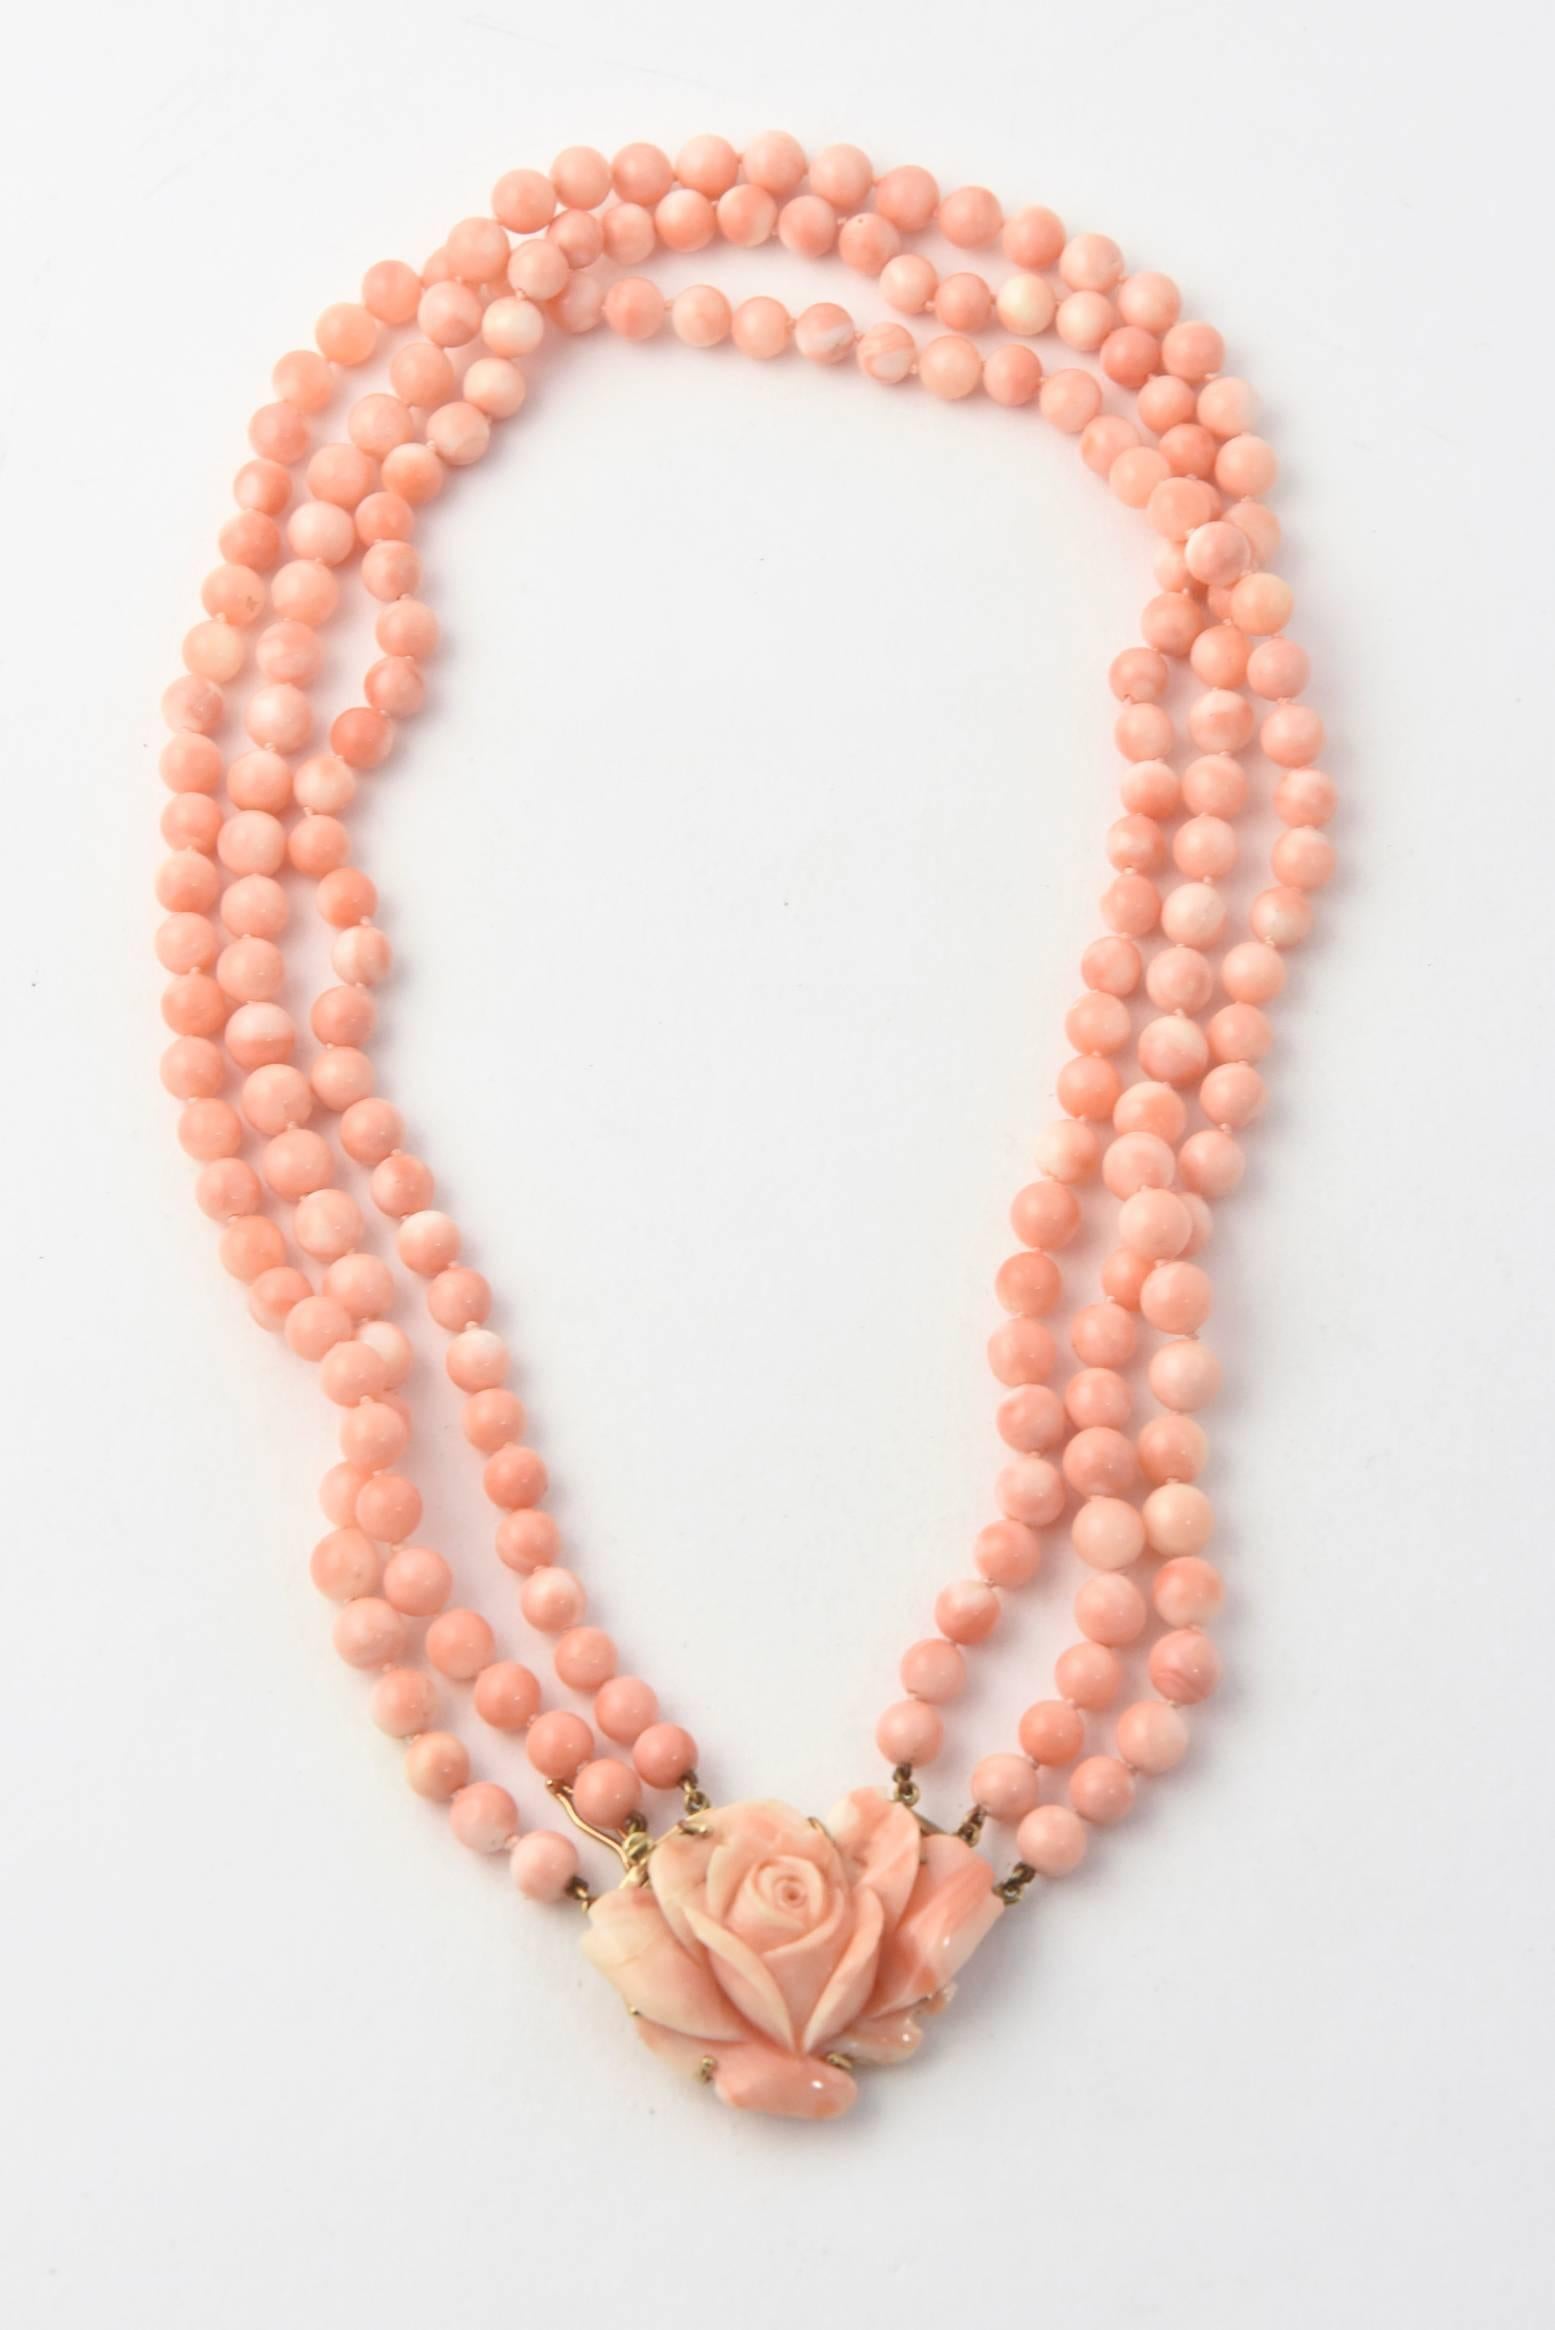 Triple strand of 6mm angle skin coral beads with a carved coral flower & 14k clasp.